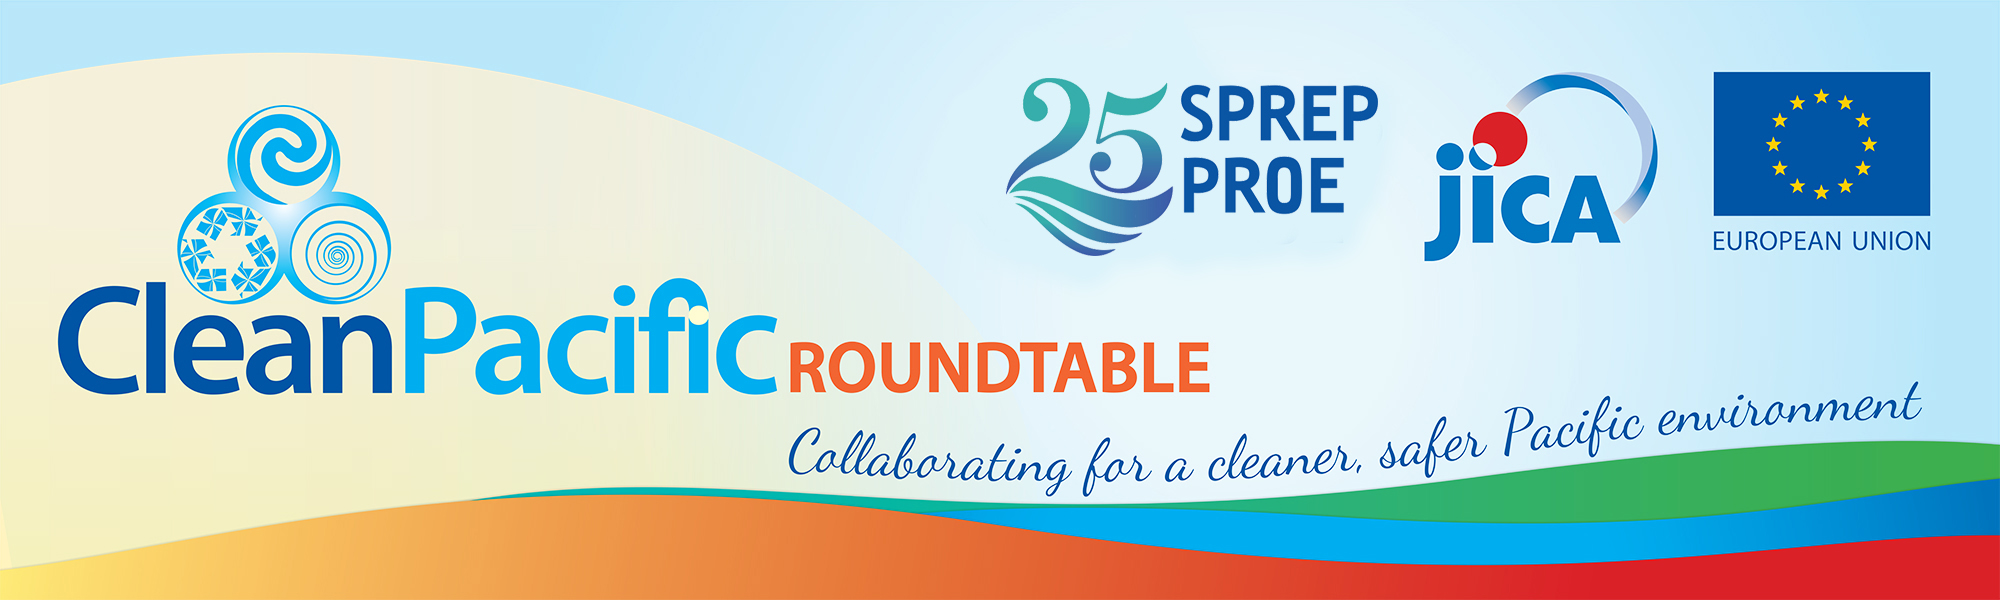 Clean Pacific Roundtable 2018